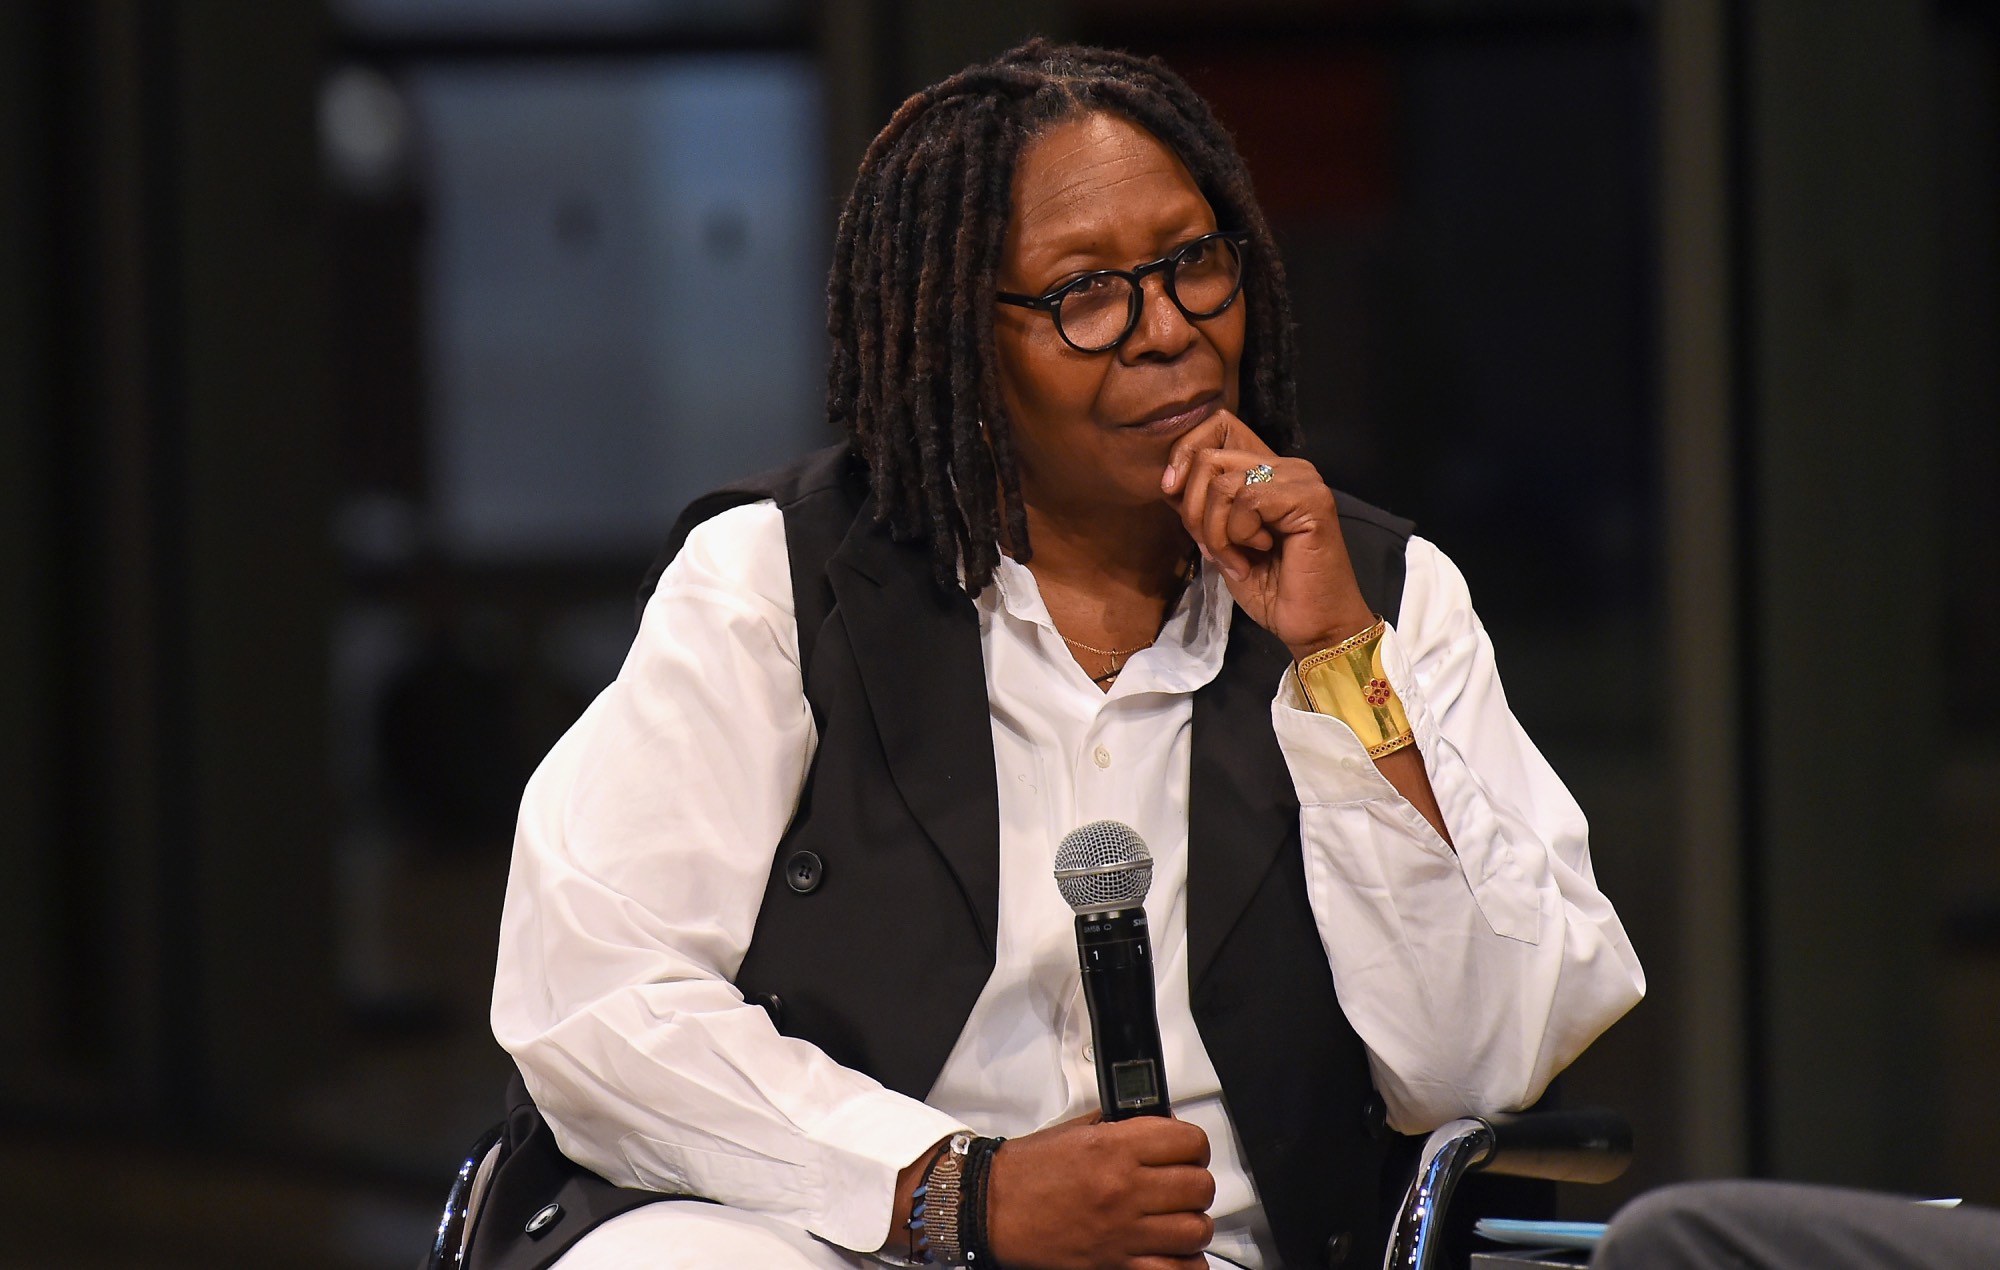 Whoopi Goldberg reminisces on her past with a surprise reunion